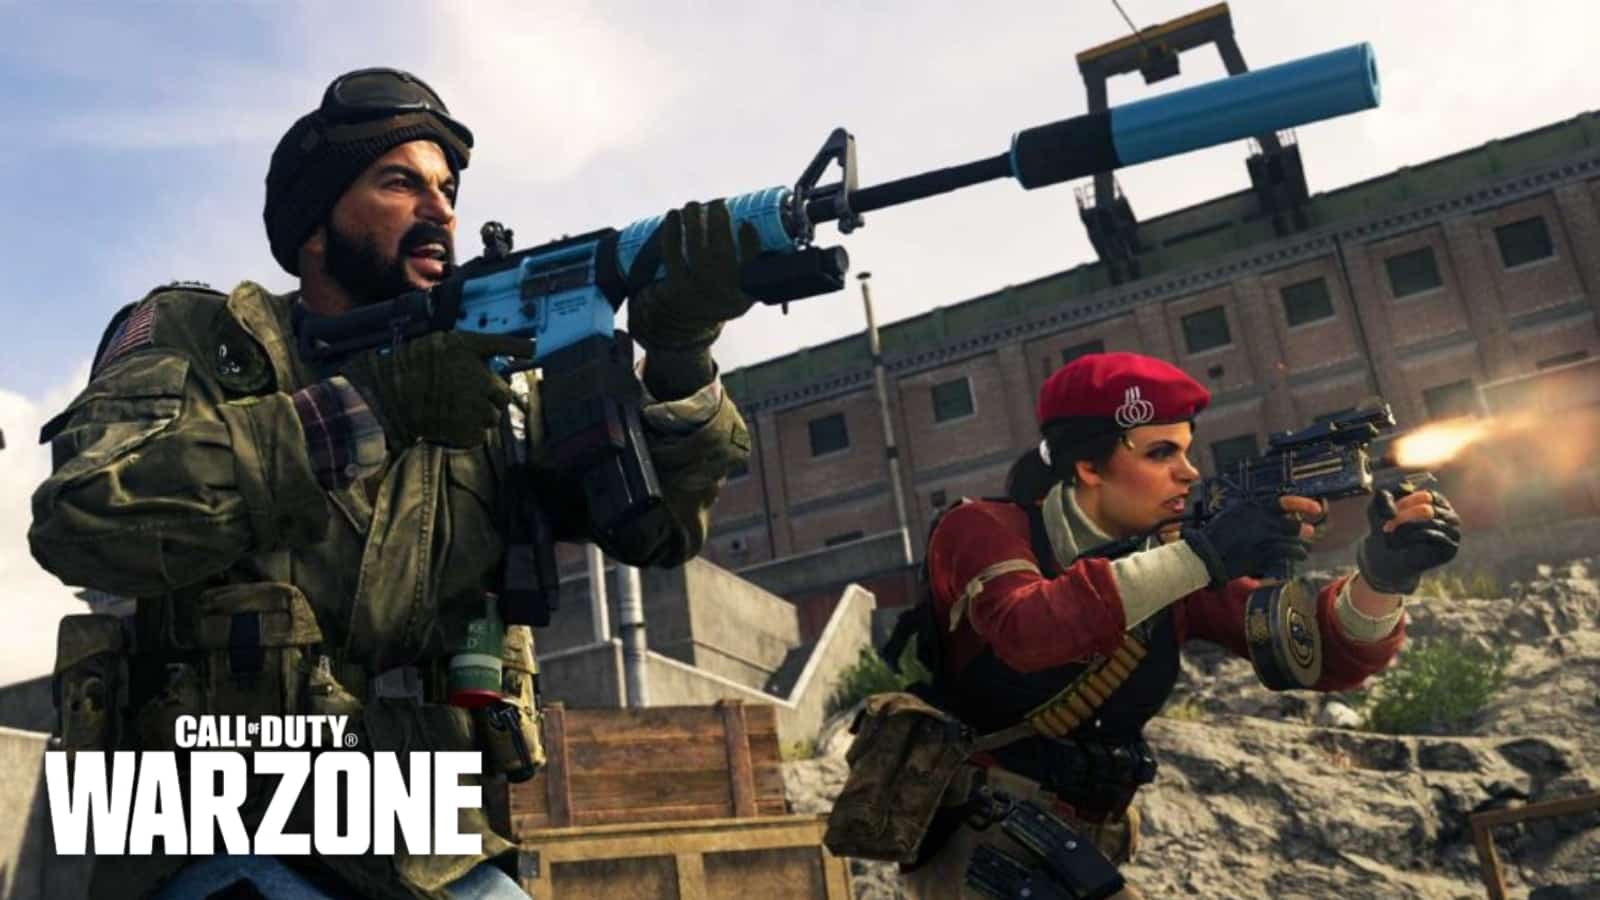 Call of Duty: Warzone Event Adds Rebirth Island Playlists After